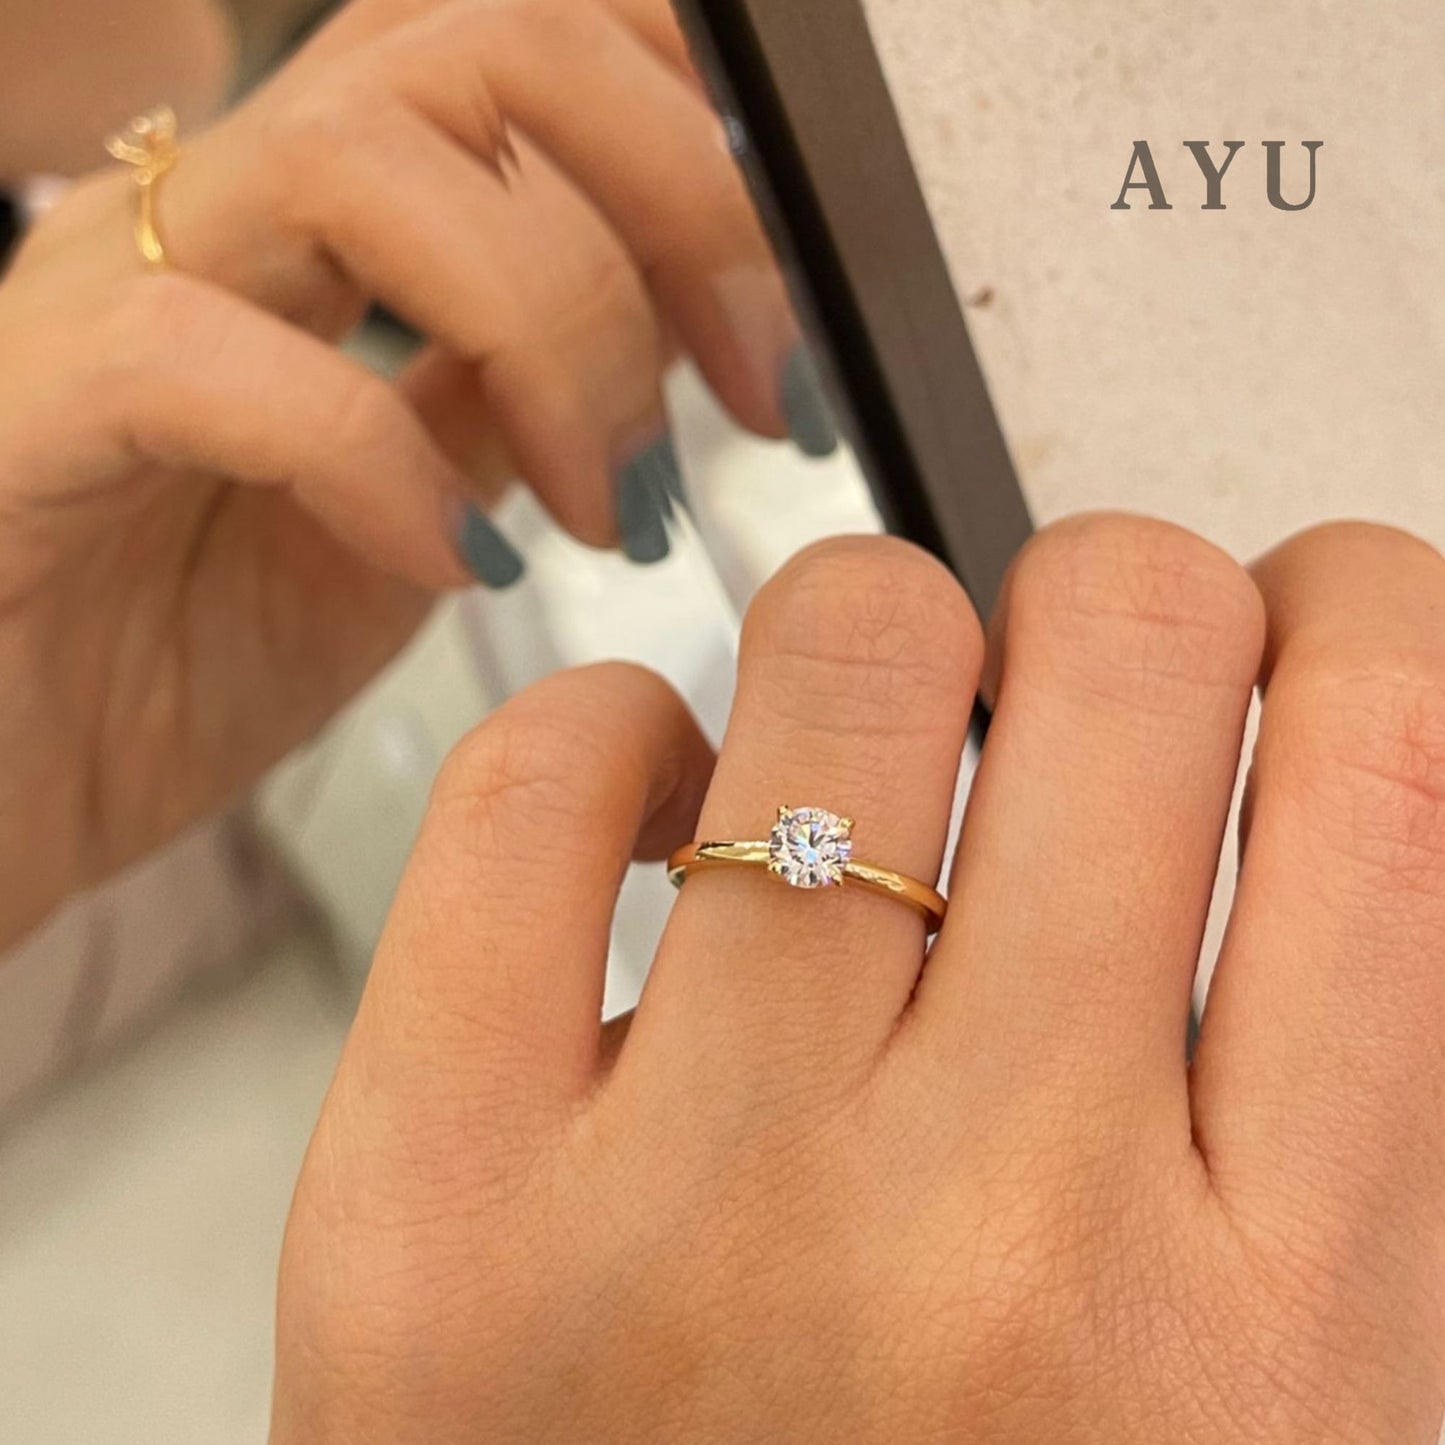 AYU 4 PRONG ROUND SOLITAIRE RING 16K YELLOW GOLD